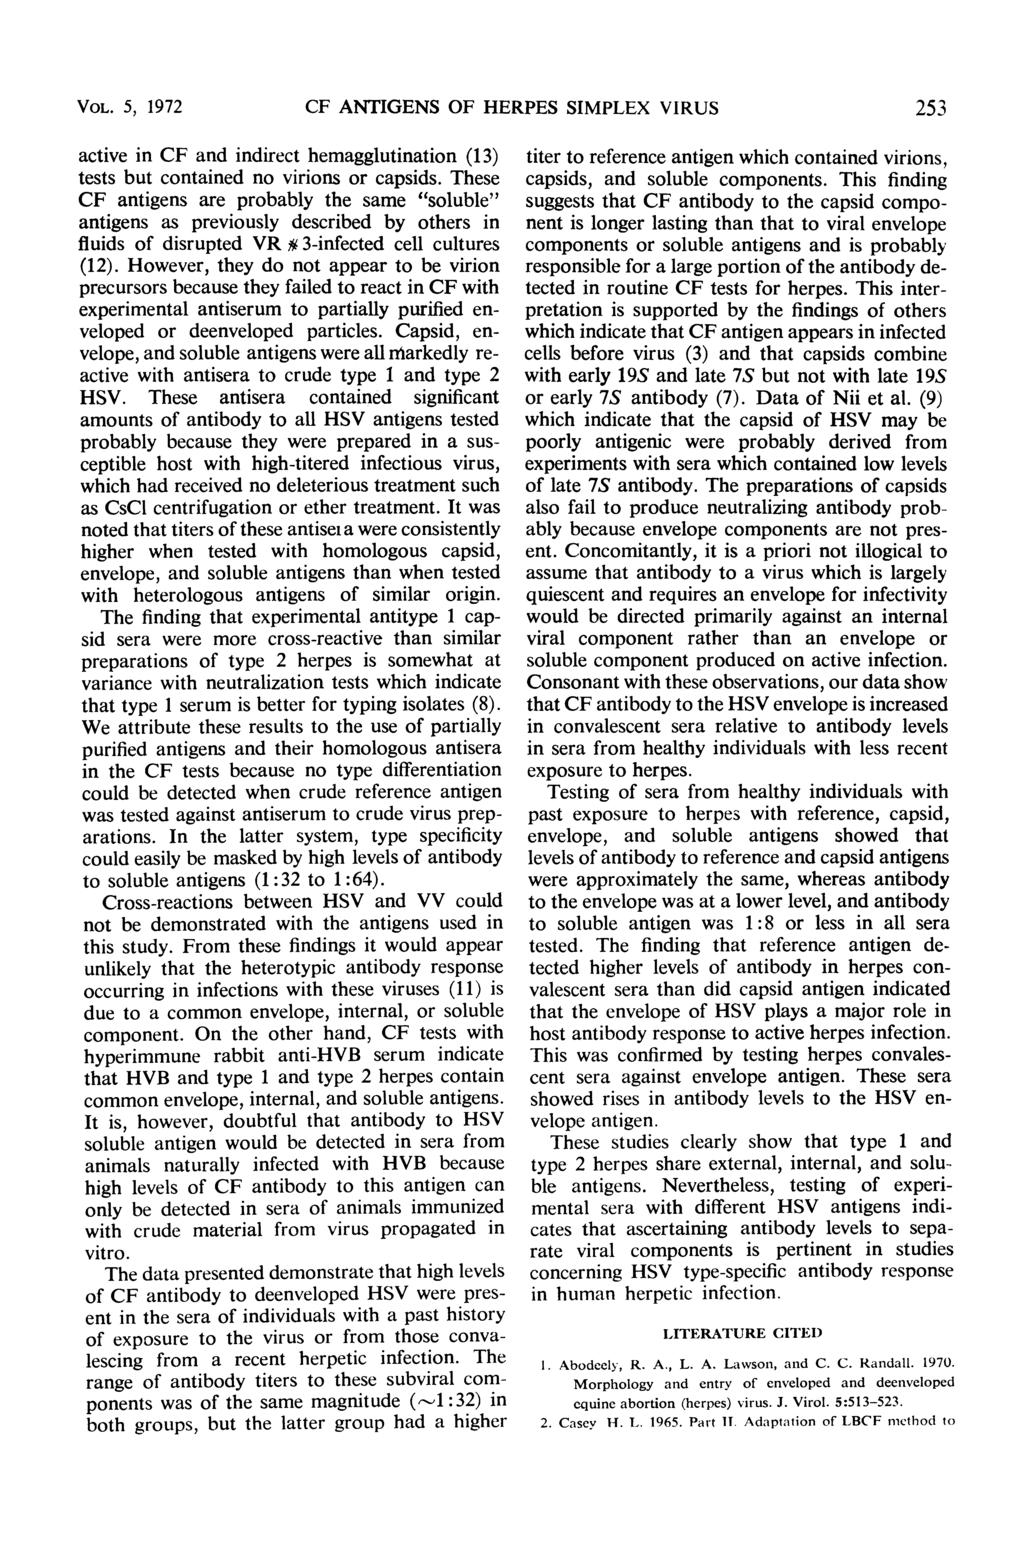 VOL. 5, 1972 CF ANTIGENS OF HERPES SIMPLEX VIRUS 25 active in CF and indirect hemagglutination (1) tests but contained no virions or capsids.